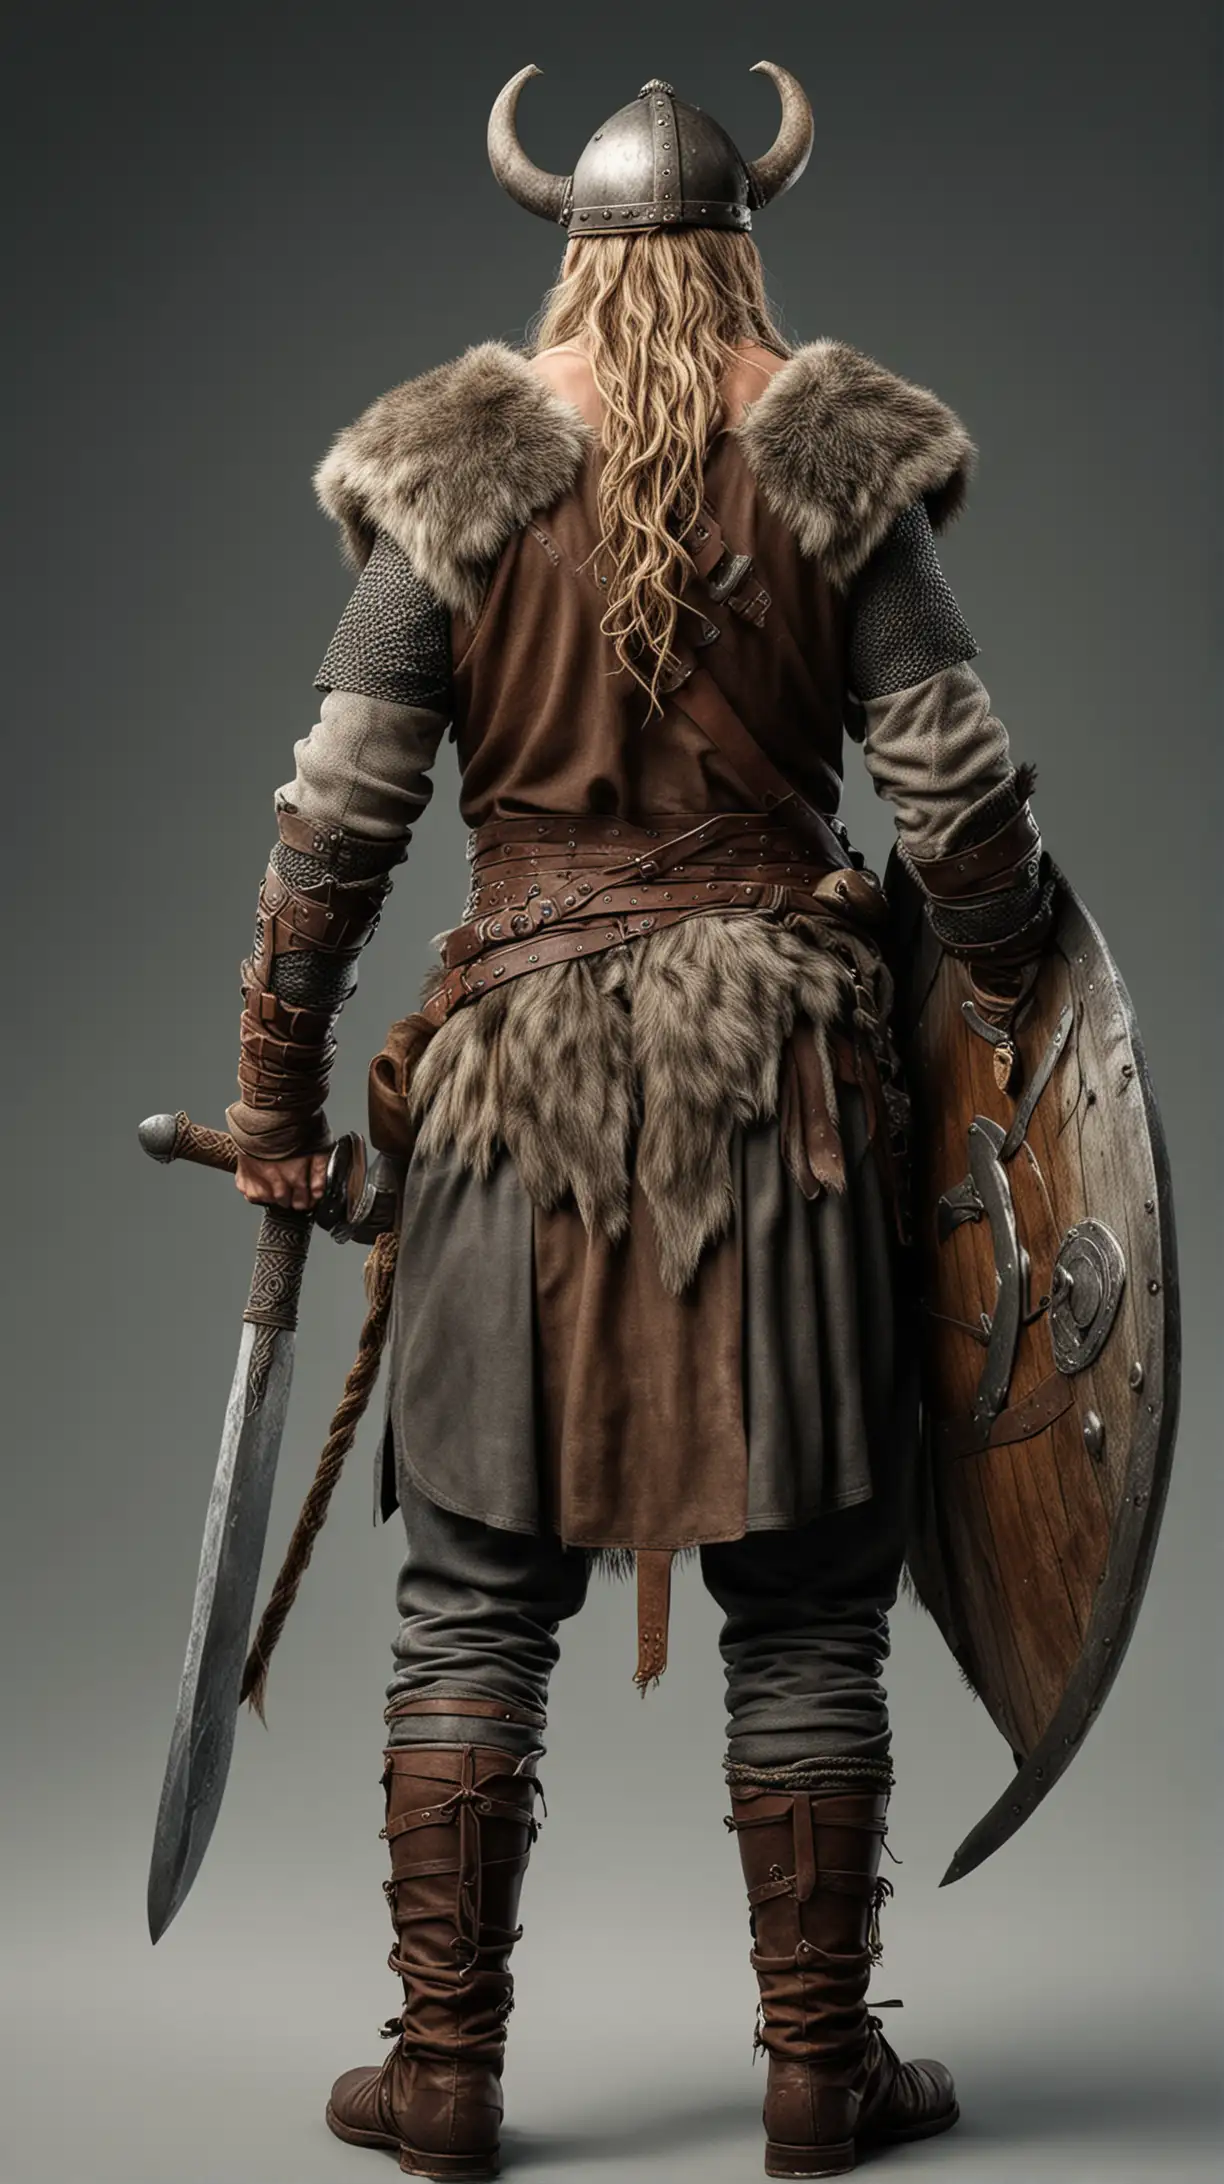 Strong Viking Warrior from Behind Full Body Shot